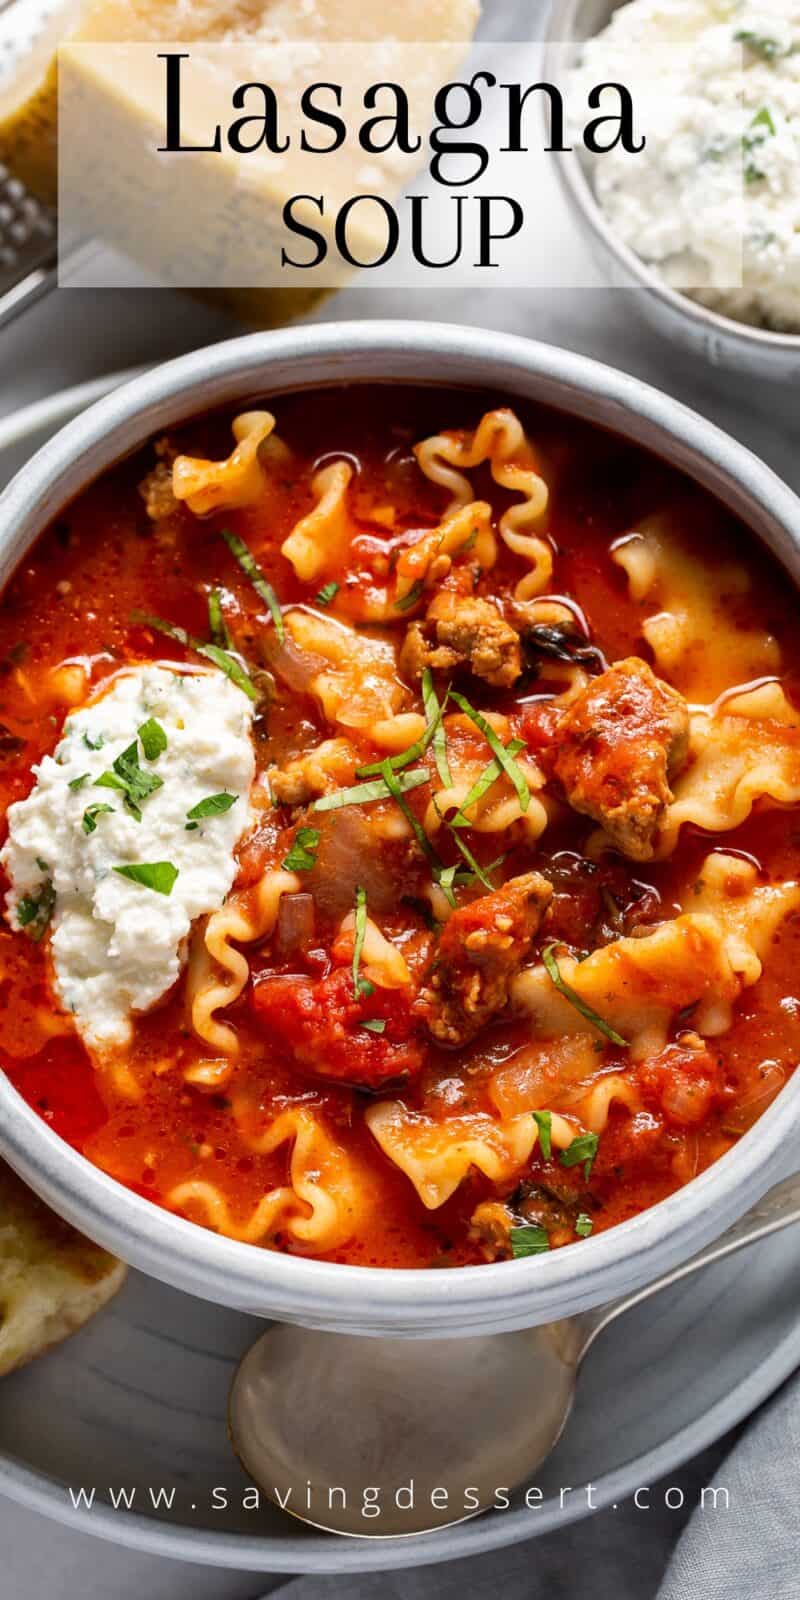 Overhead view of a bowl of lasagna soup with a dollop of ricotta cheese in the middle